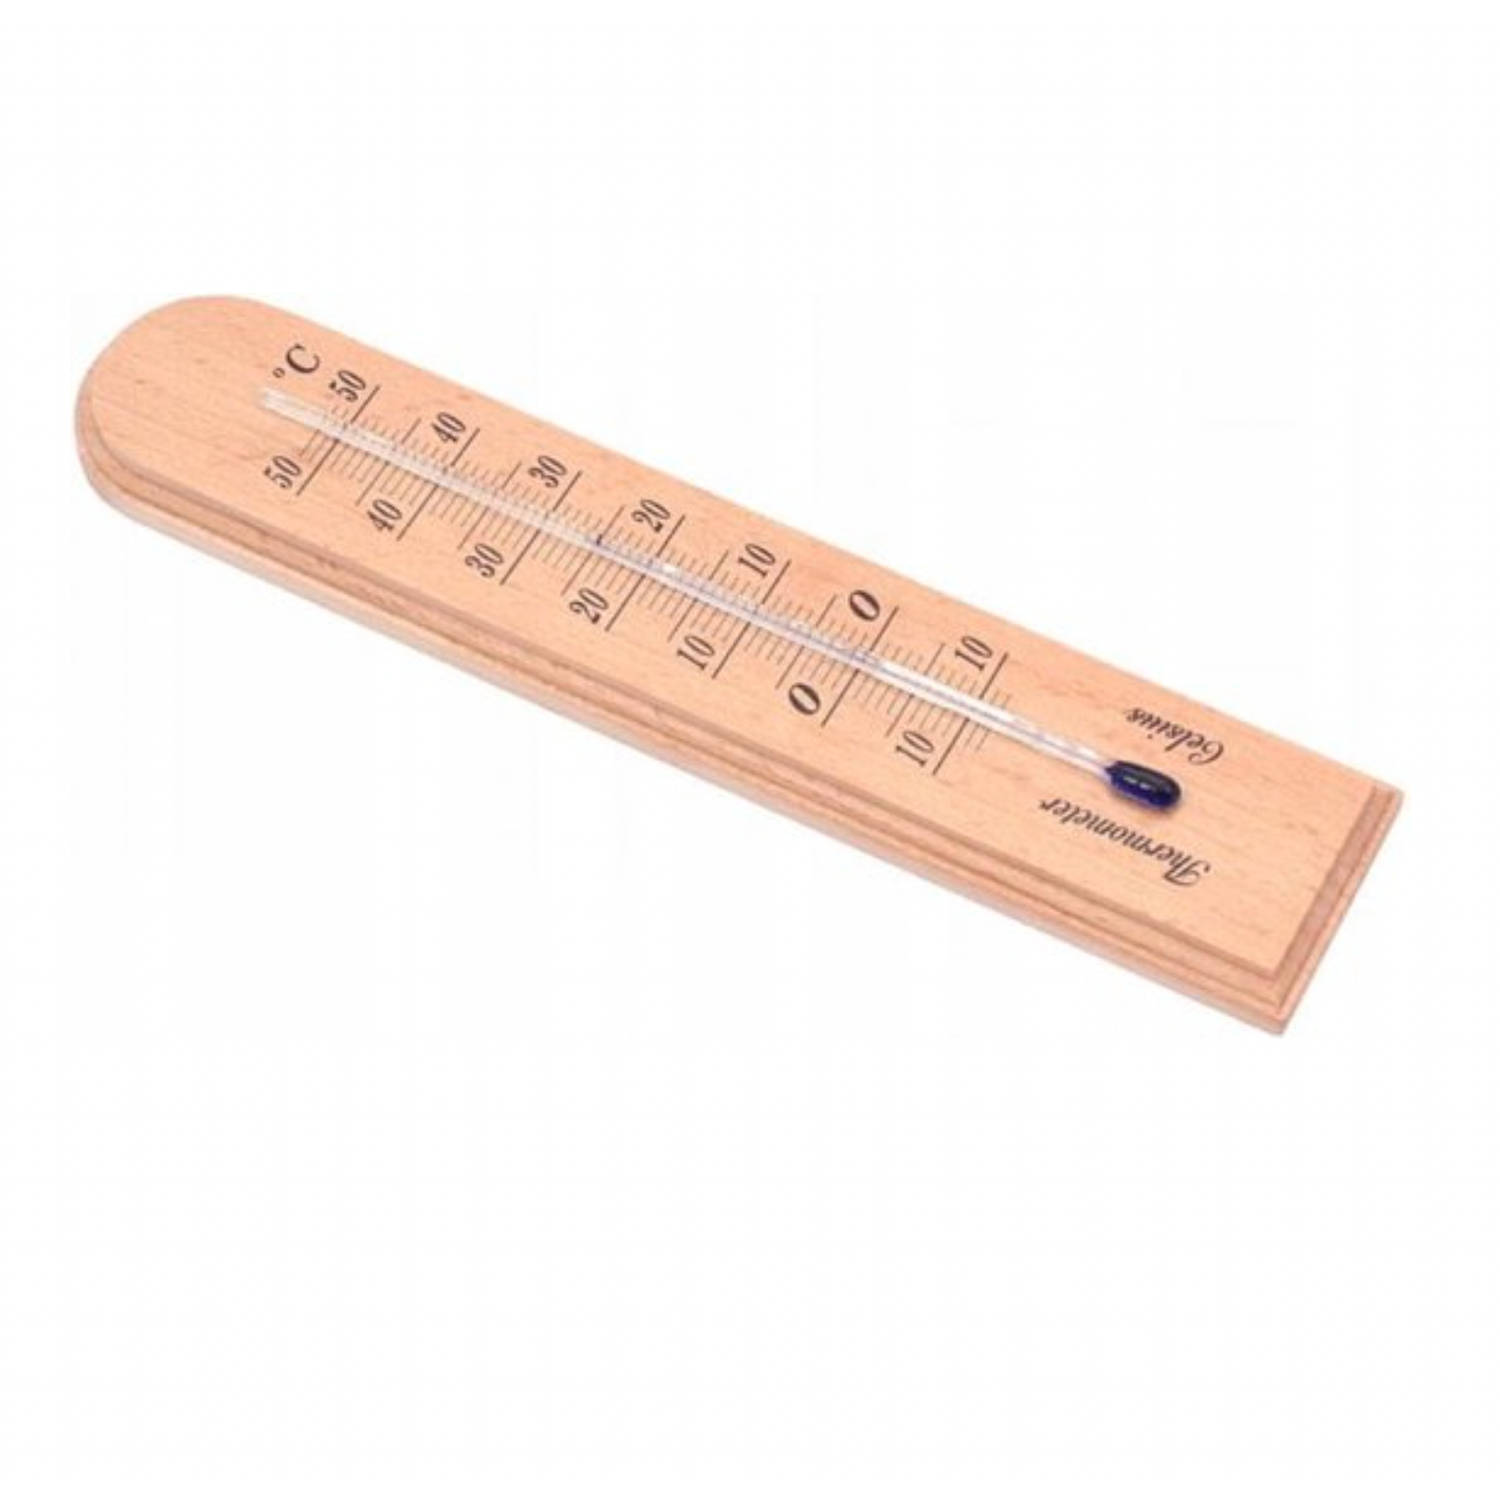 Synx Tools Thermometer Hout Design 20cm - Thermometers - Weermeters - Buitenthermometer - Compact